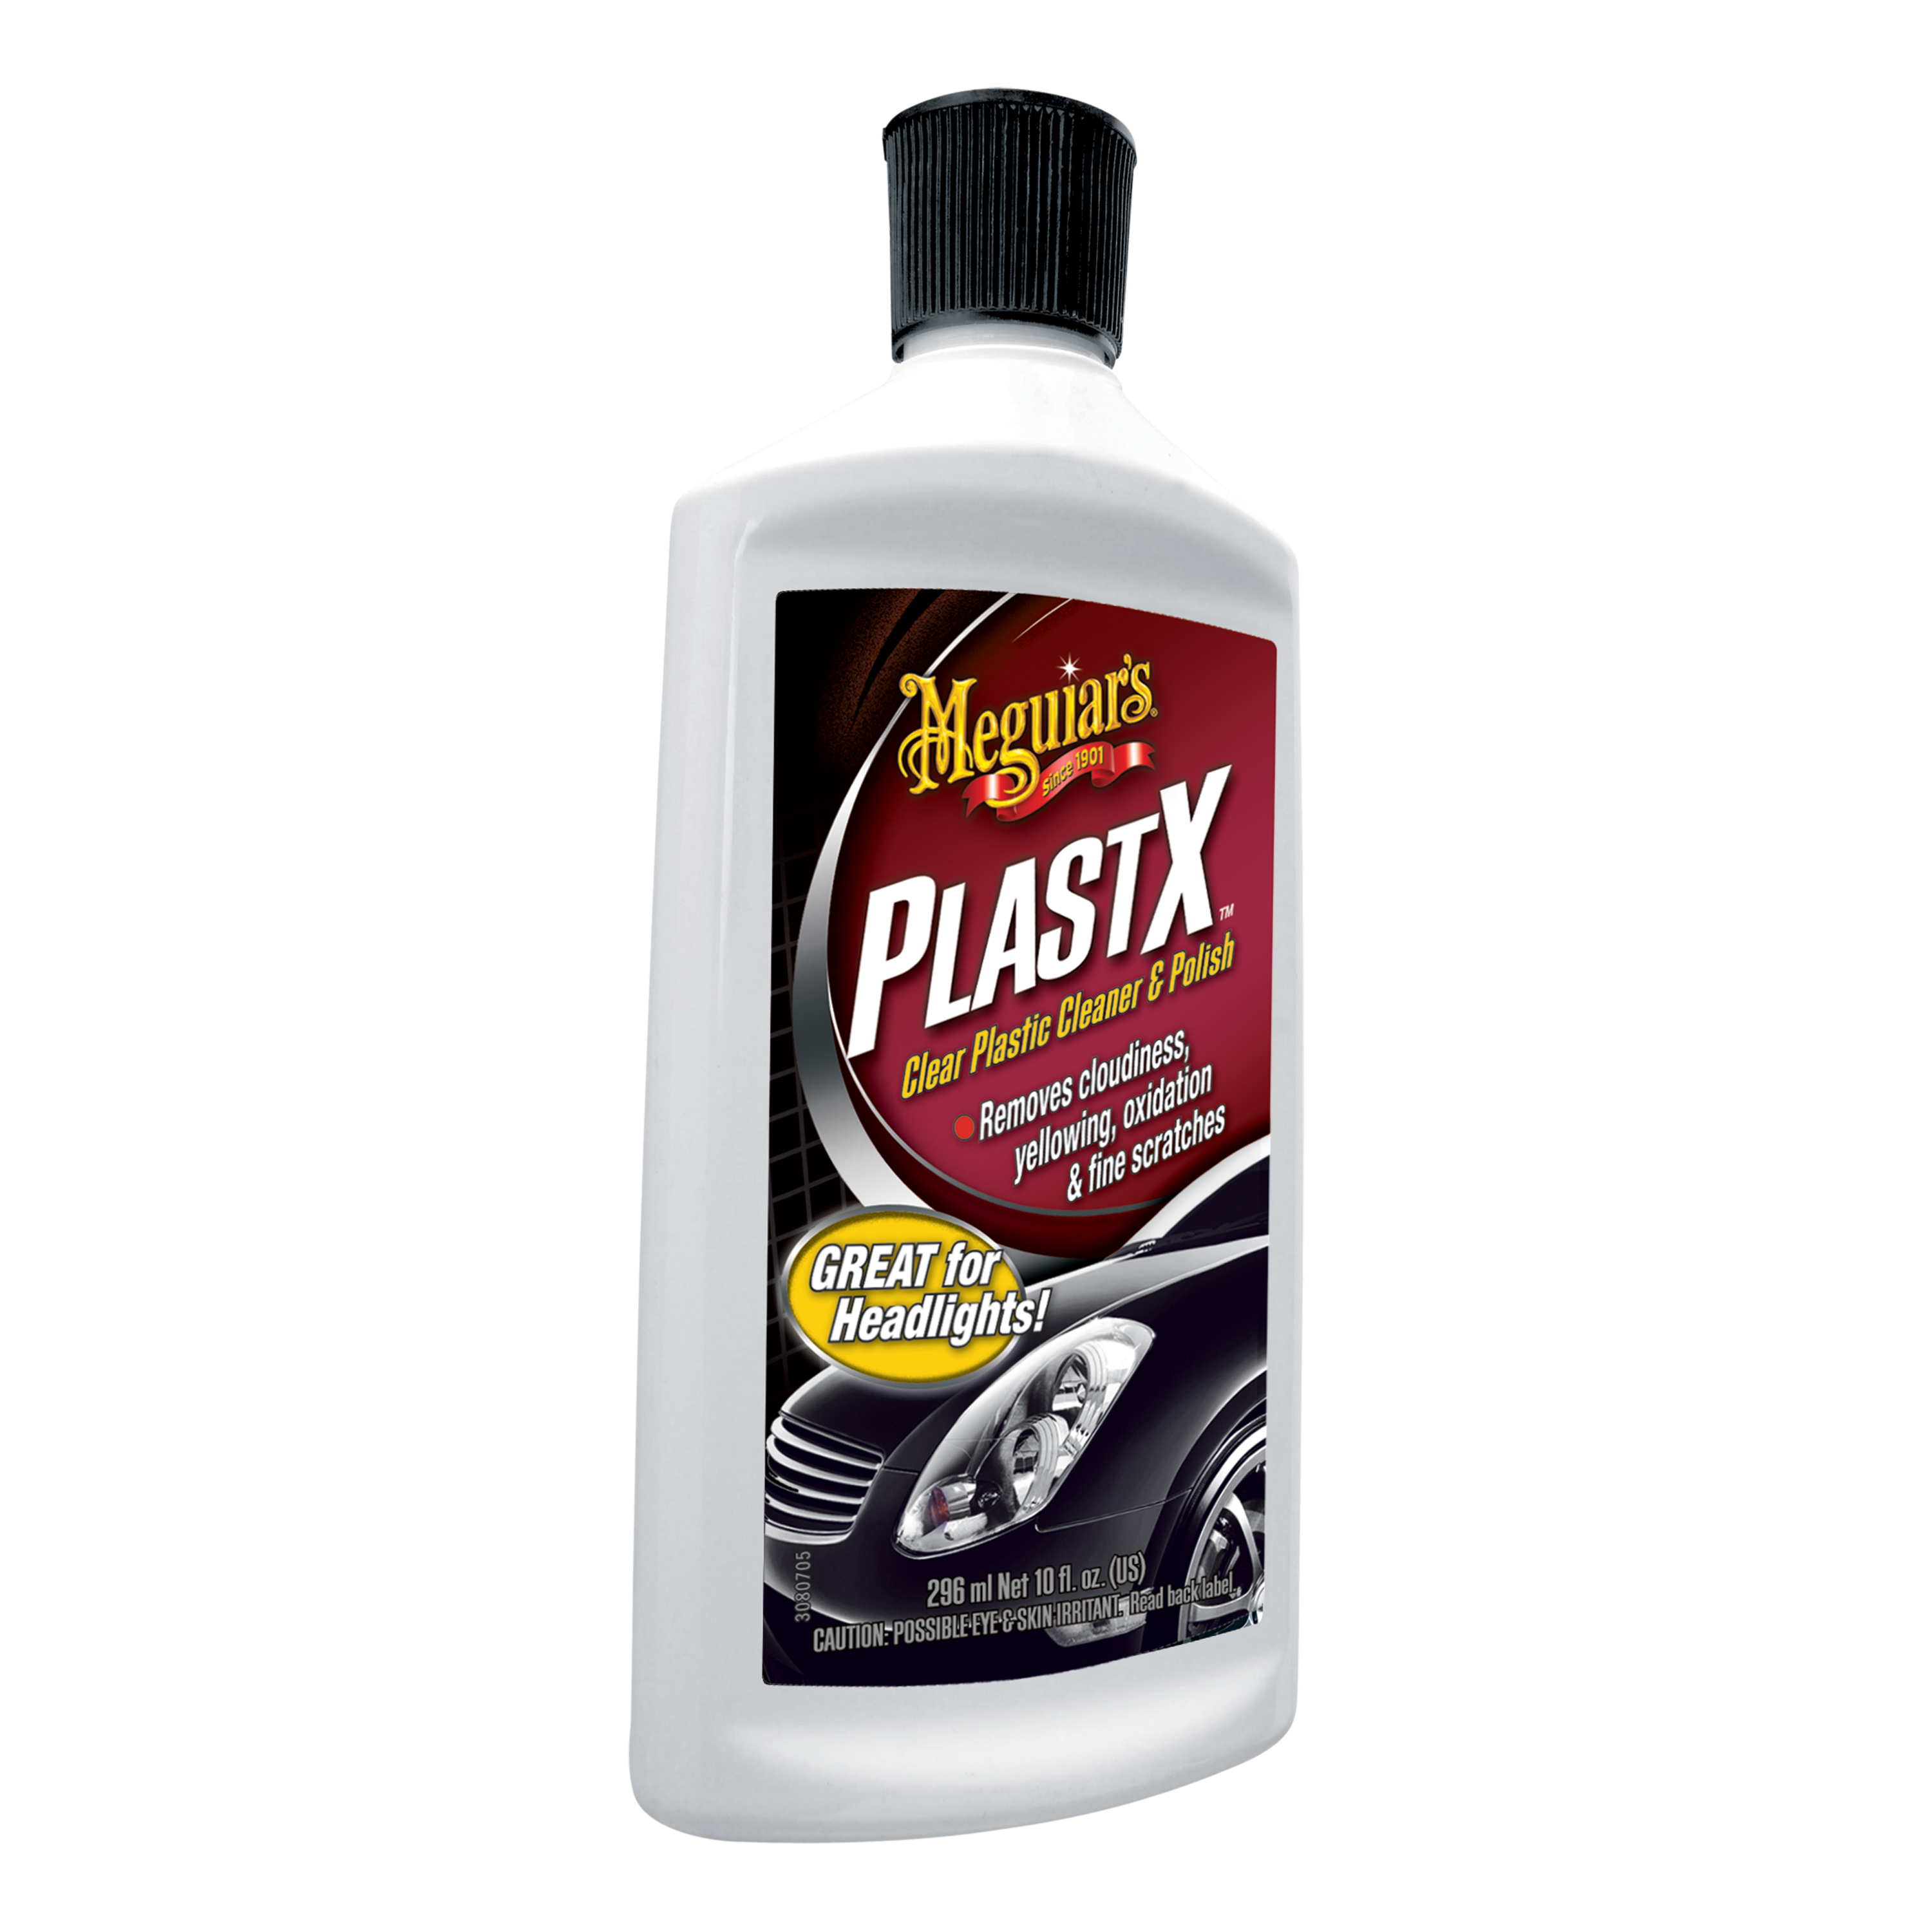 MEGUIARS PLASTX REVIEW // using plastX to repair scratched xbox games, dvds  and cds 